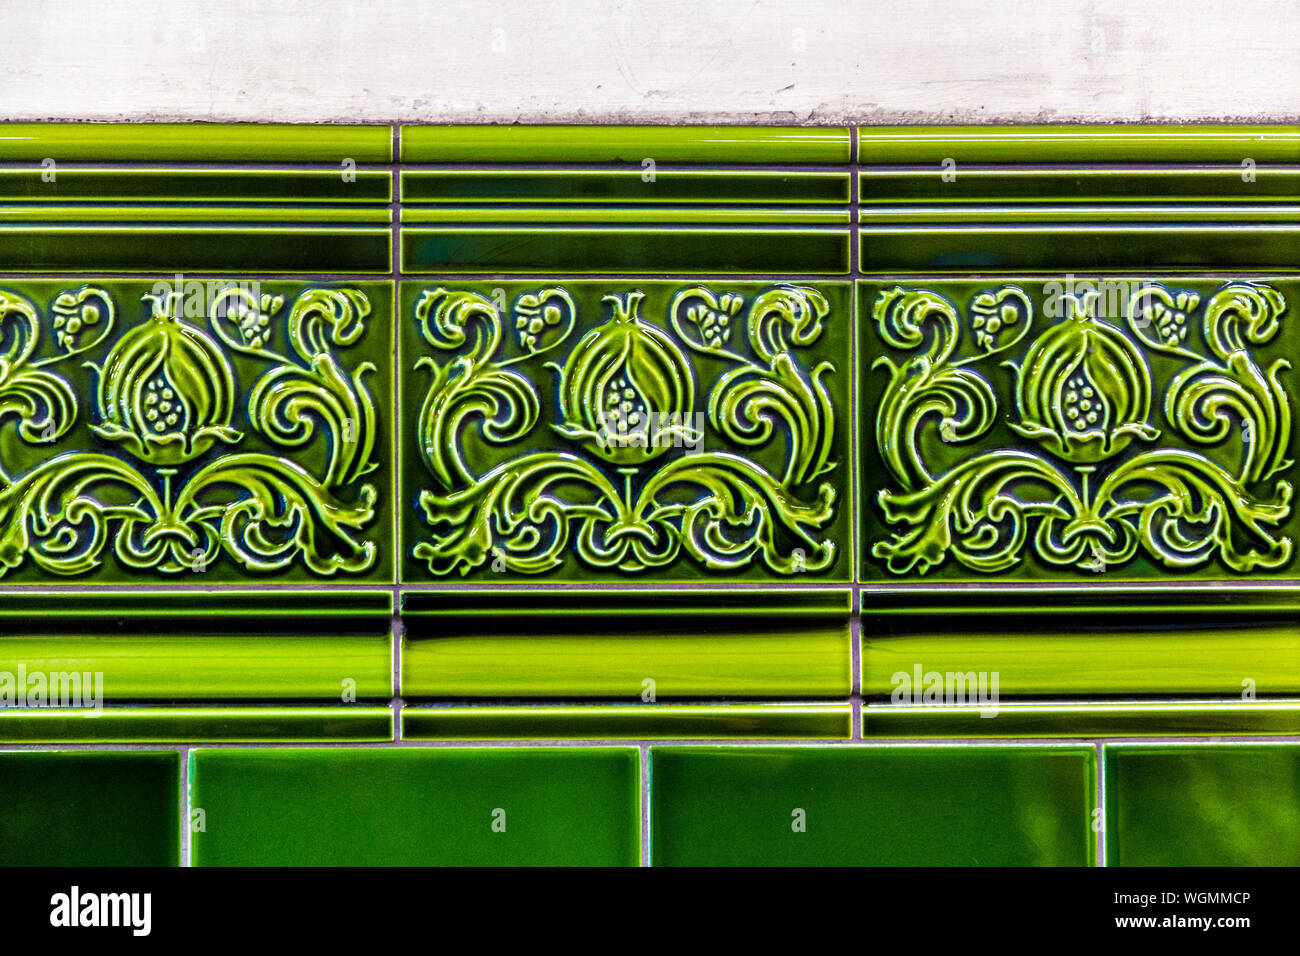 Detail of green decorative ceramic tiles featuring an acanthus leaf frieze at Chalk Farm Underground Station, London, UK Stock Photo